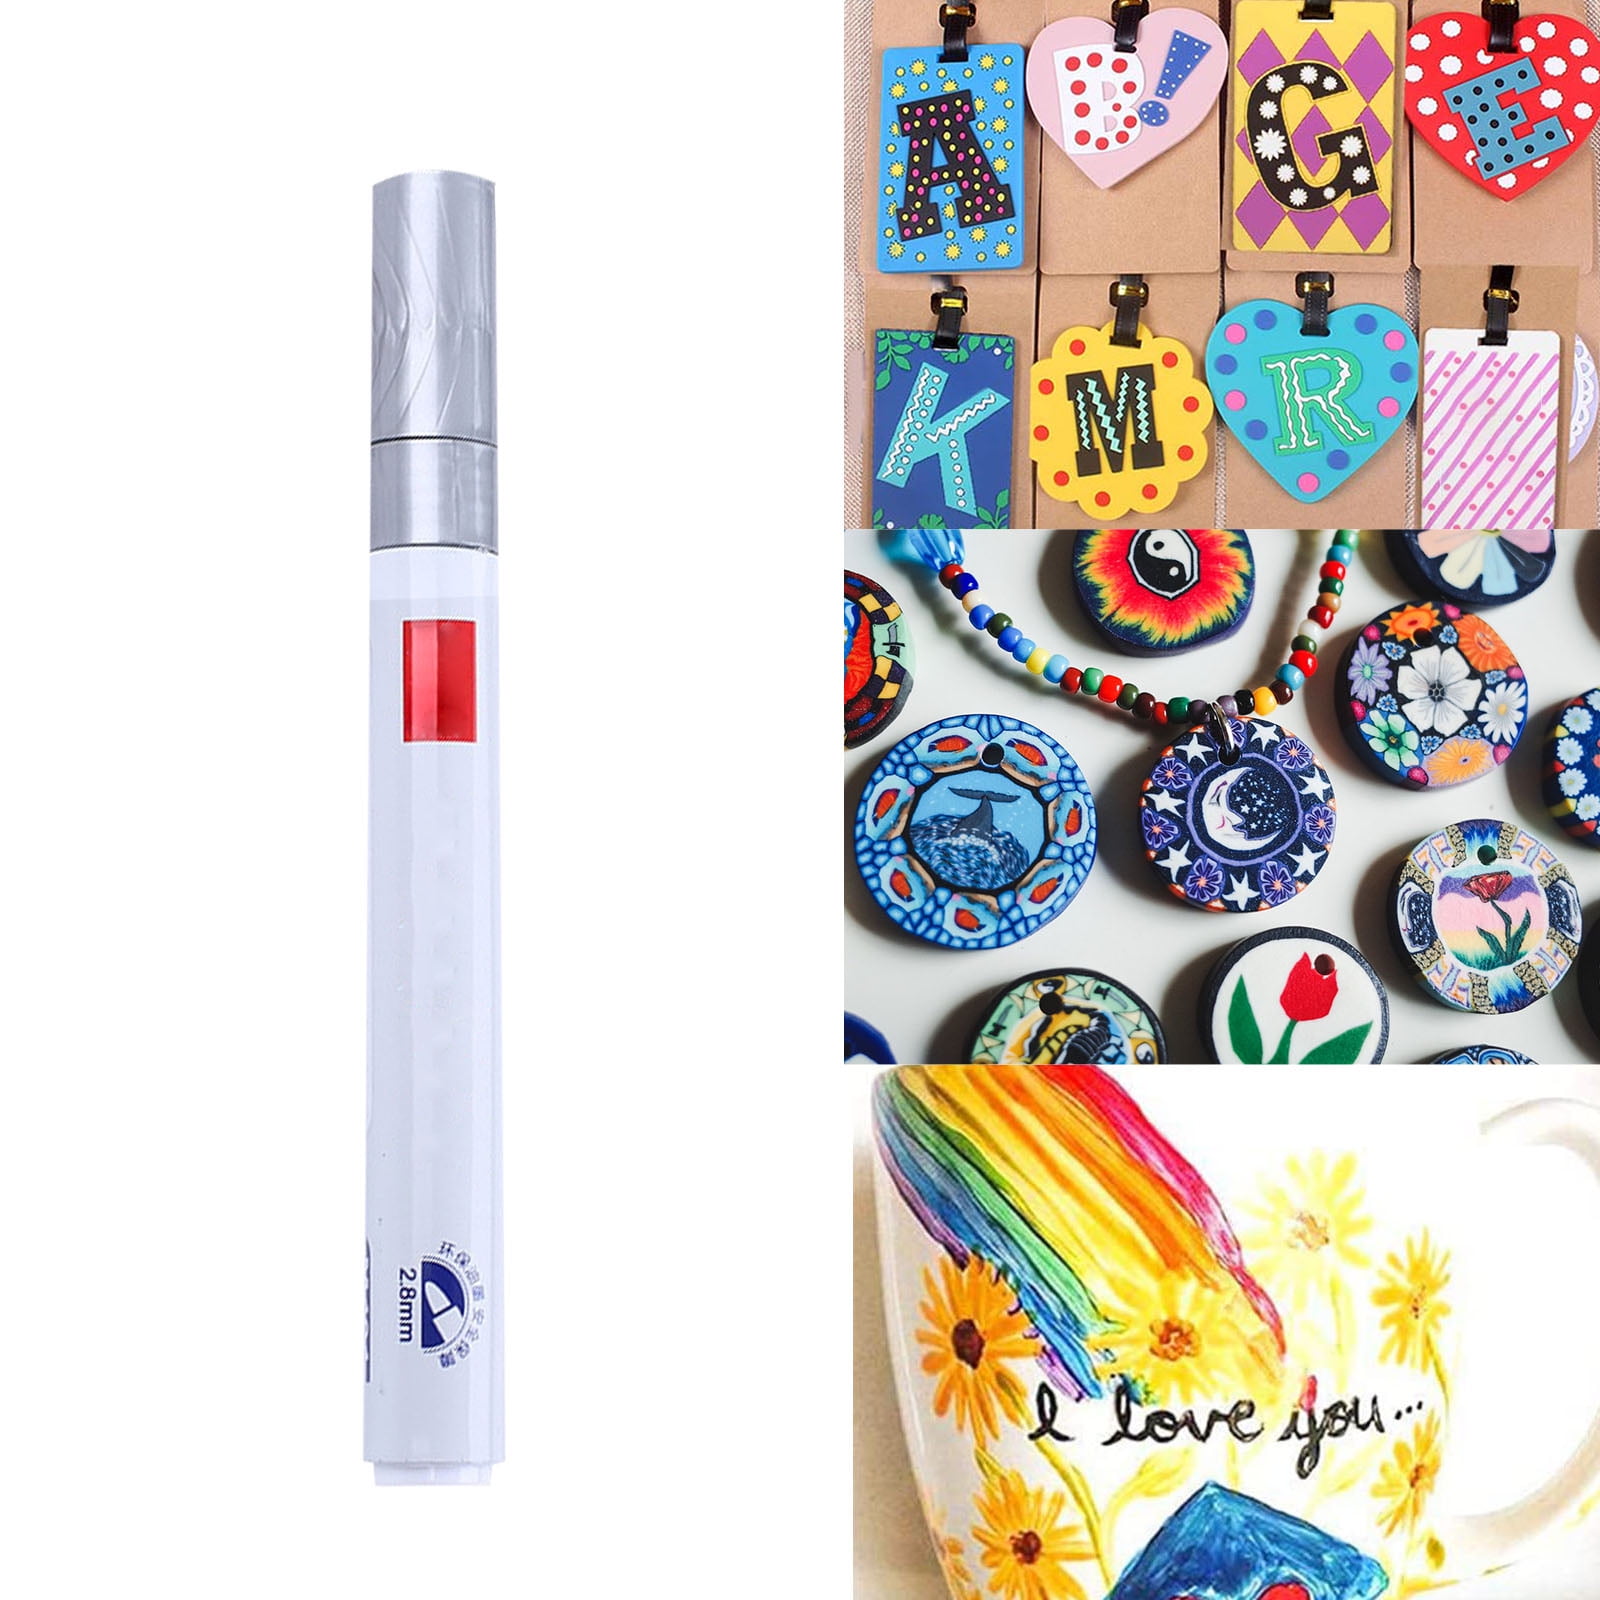 Paint Pens, Paint Markers 12 Colors (3mm) Oil-Based Painting Pen Set for  Rocks Painting Christmas Decorations Wood Plastic Canvas Glass Mugs — emooqi